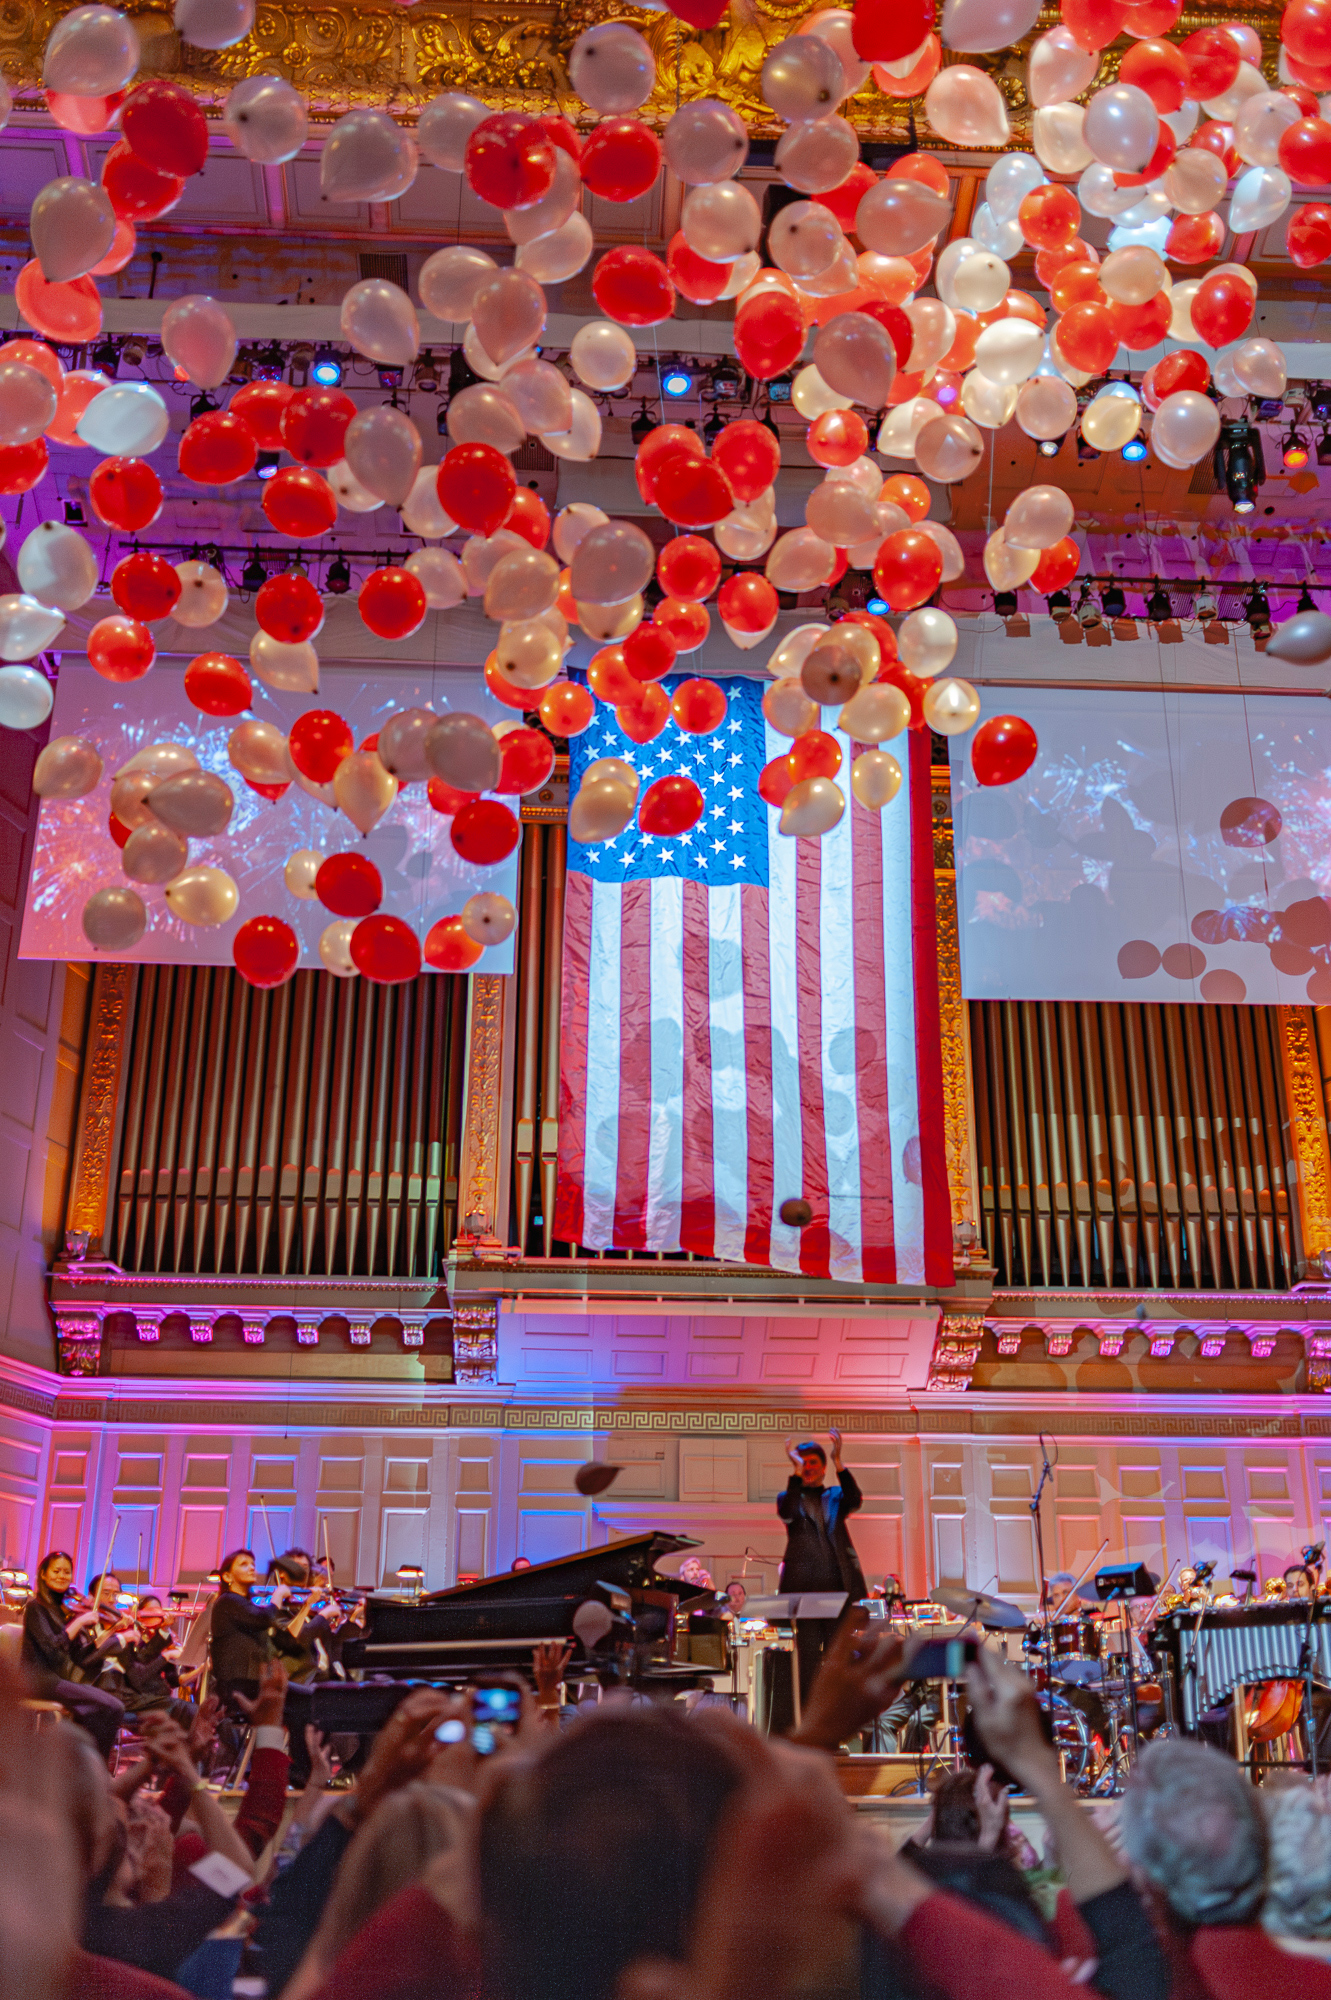 MIT Class of ’59 at the Boston Pops